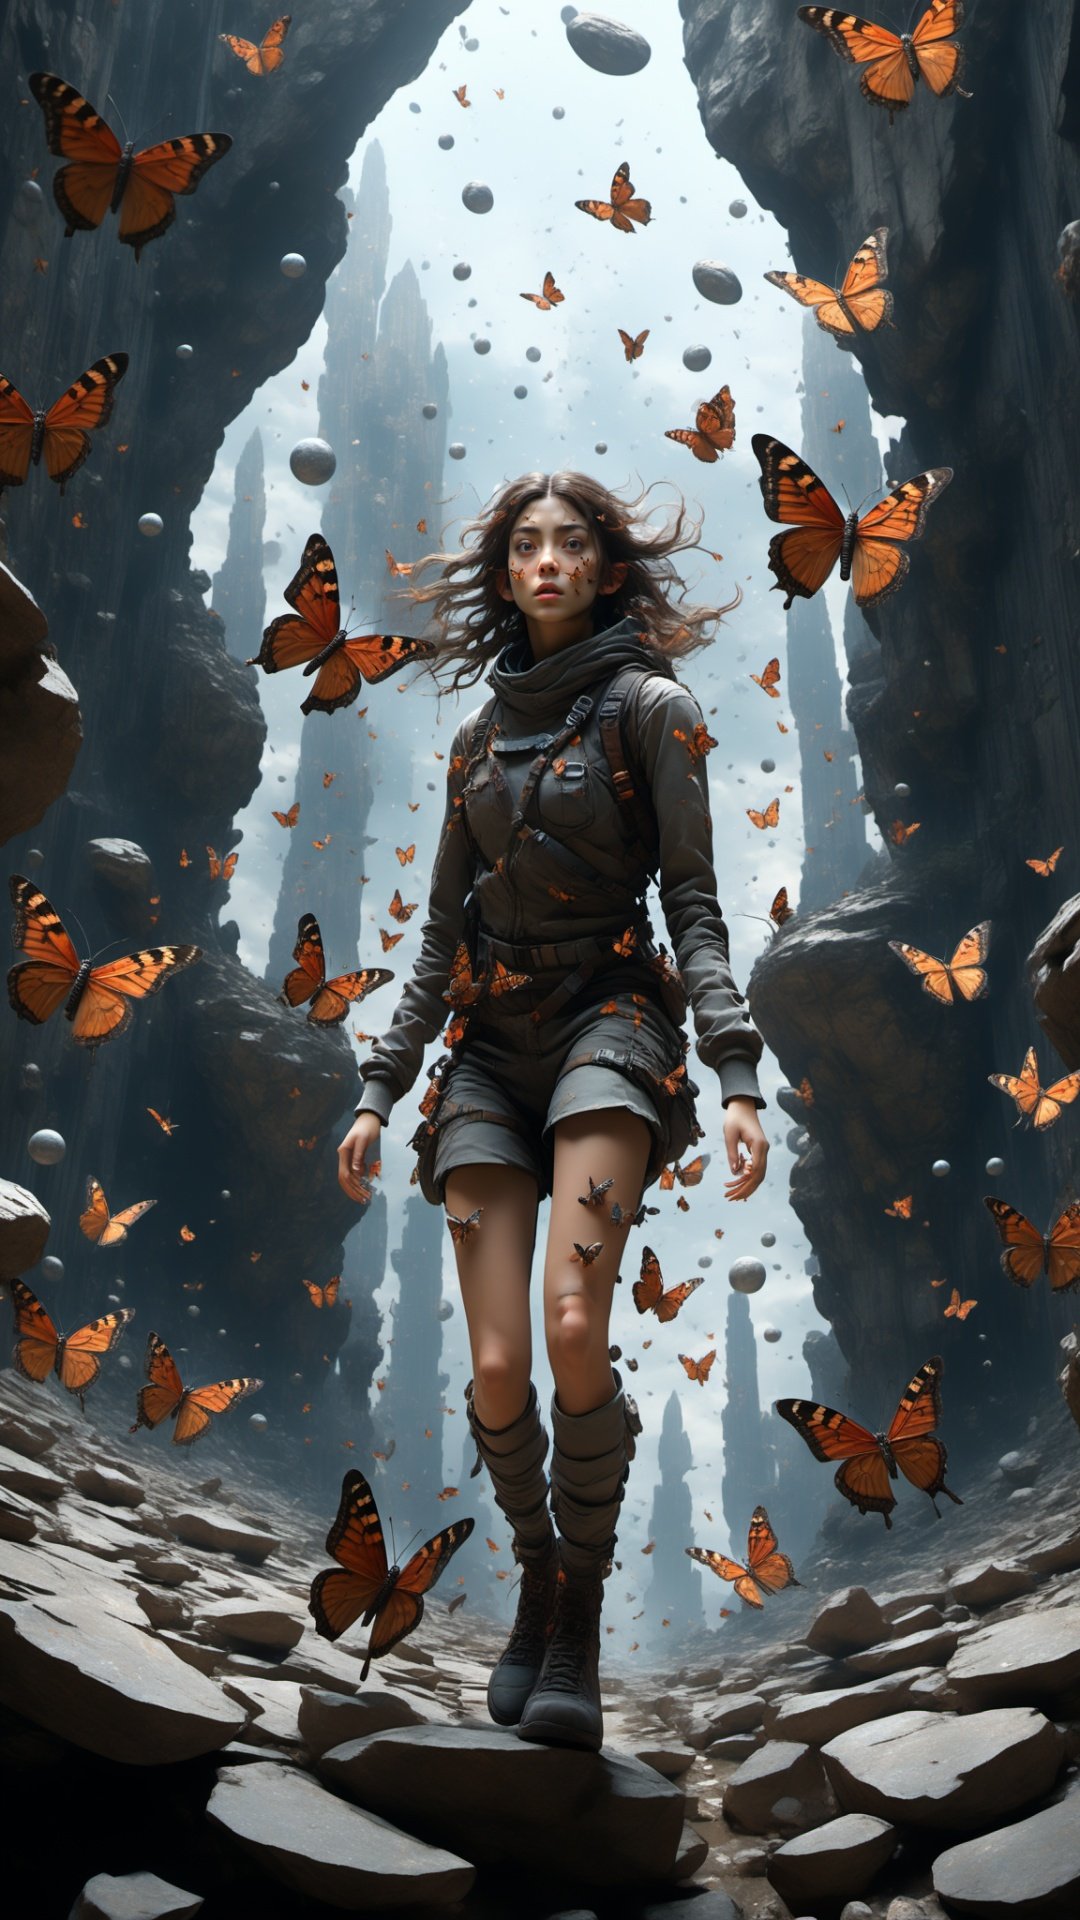 3girl,two right angles on the head,looking from above,the space,afloat,moons,Running position,Wide-angle lens distortion,butterfly,rock,Photographic,3D Model,Cinematic,(masterpiece:1.4),Rebellious girl,NVDI,building,A high resolution,ultra - detailed,<lora:SDXL_Alien_garbage:0.7>,<lora:Blue_butterfly_SDXL1.0:0.5>,<lora:Fallen_angel_SDXL1.0:0.7>,